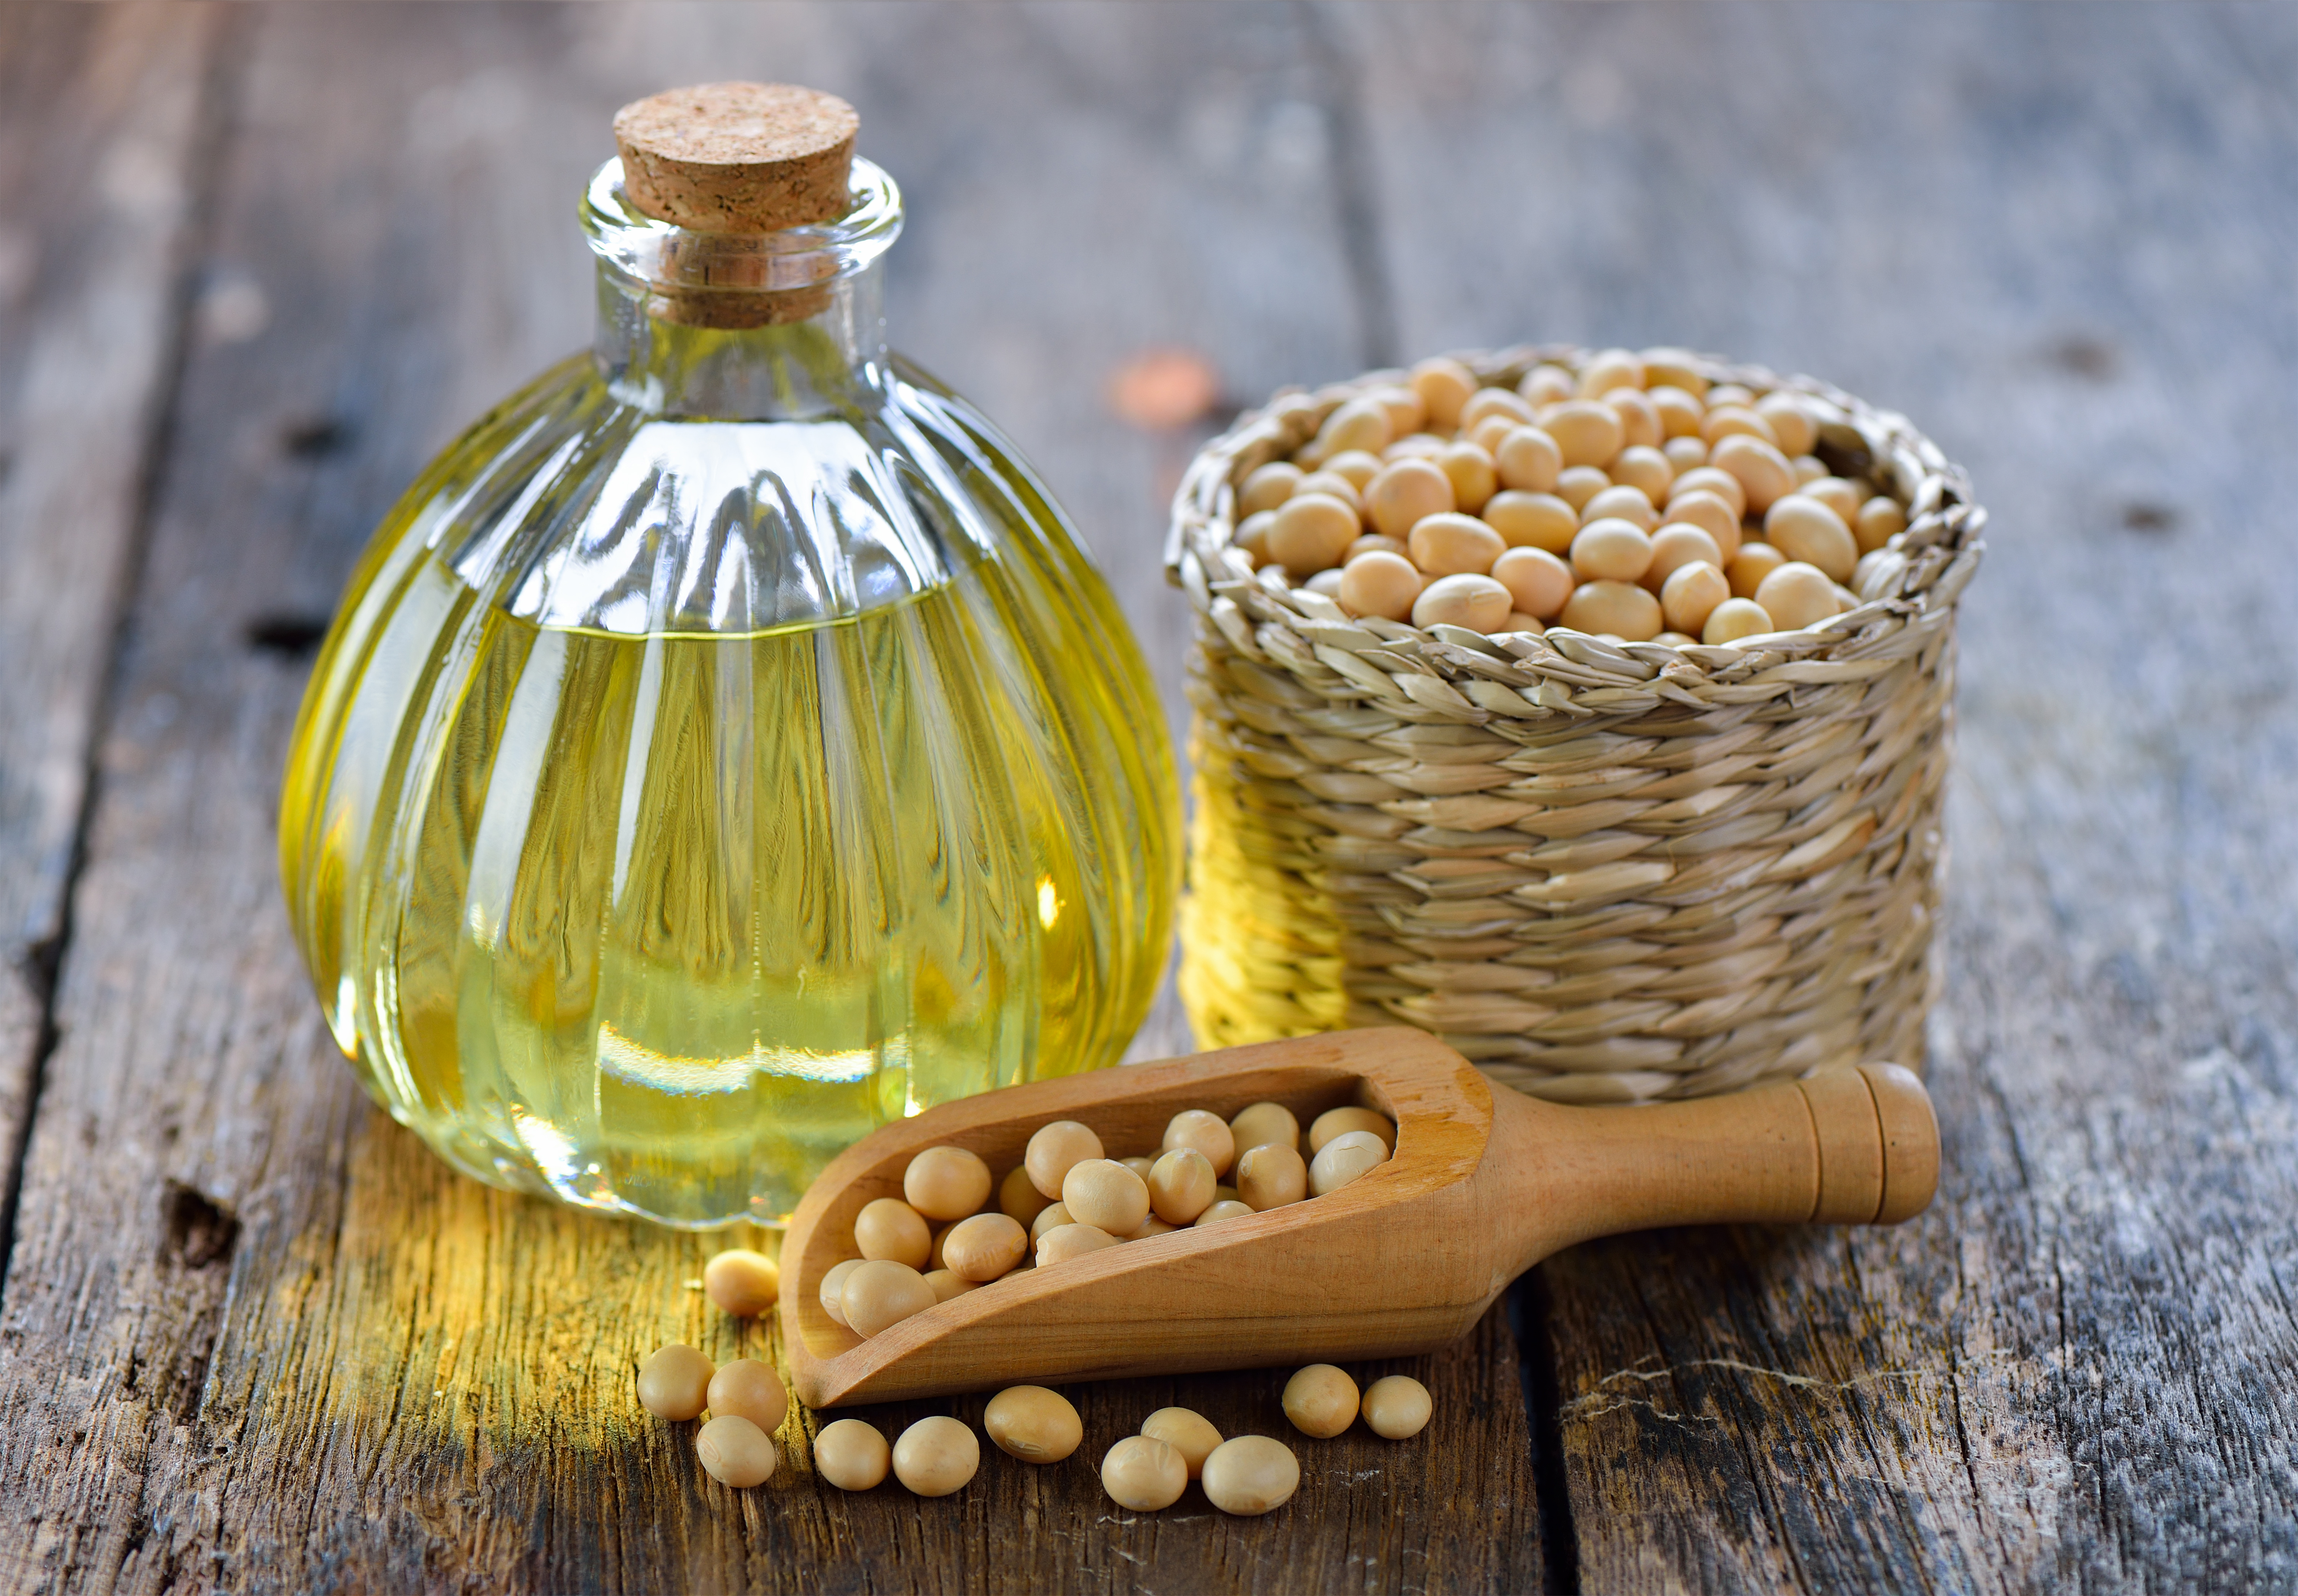 soy beans and oil